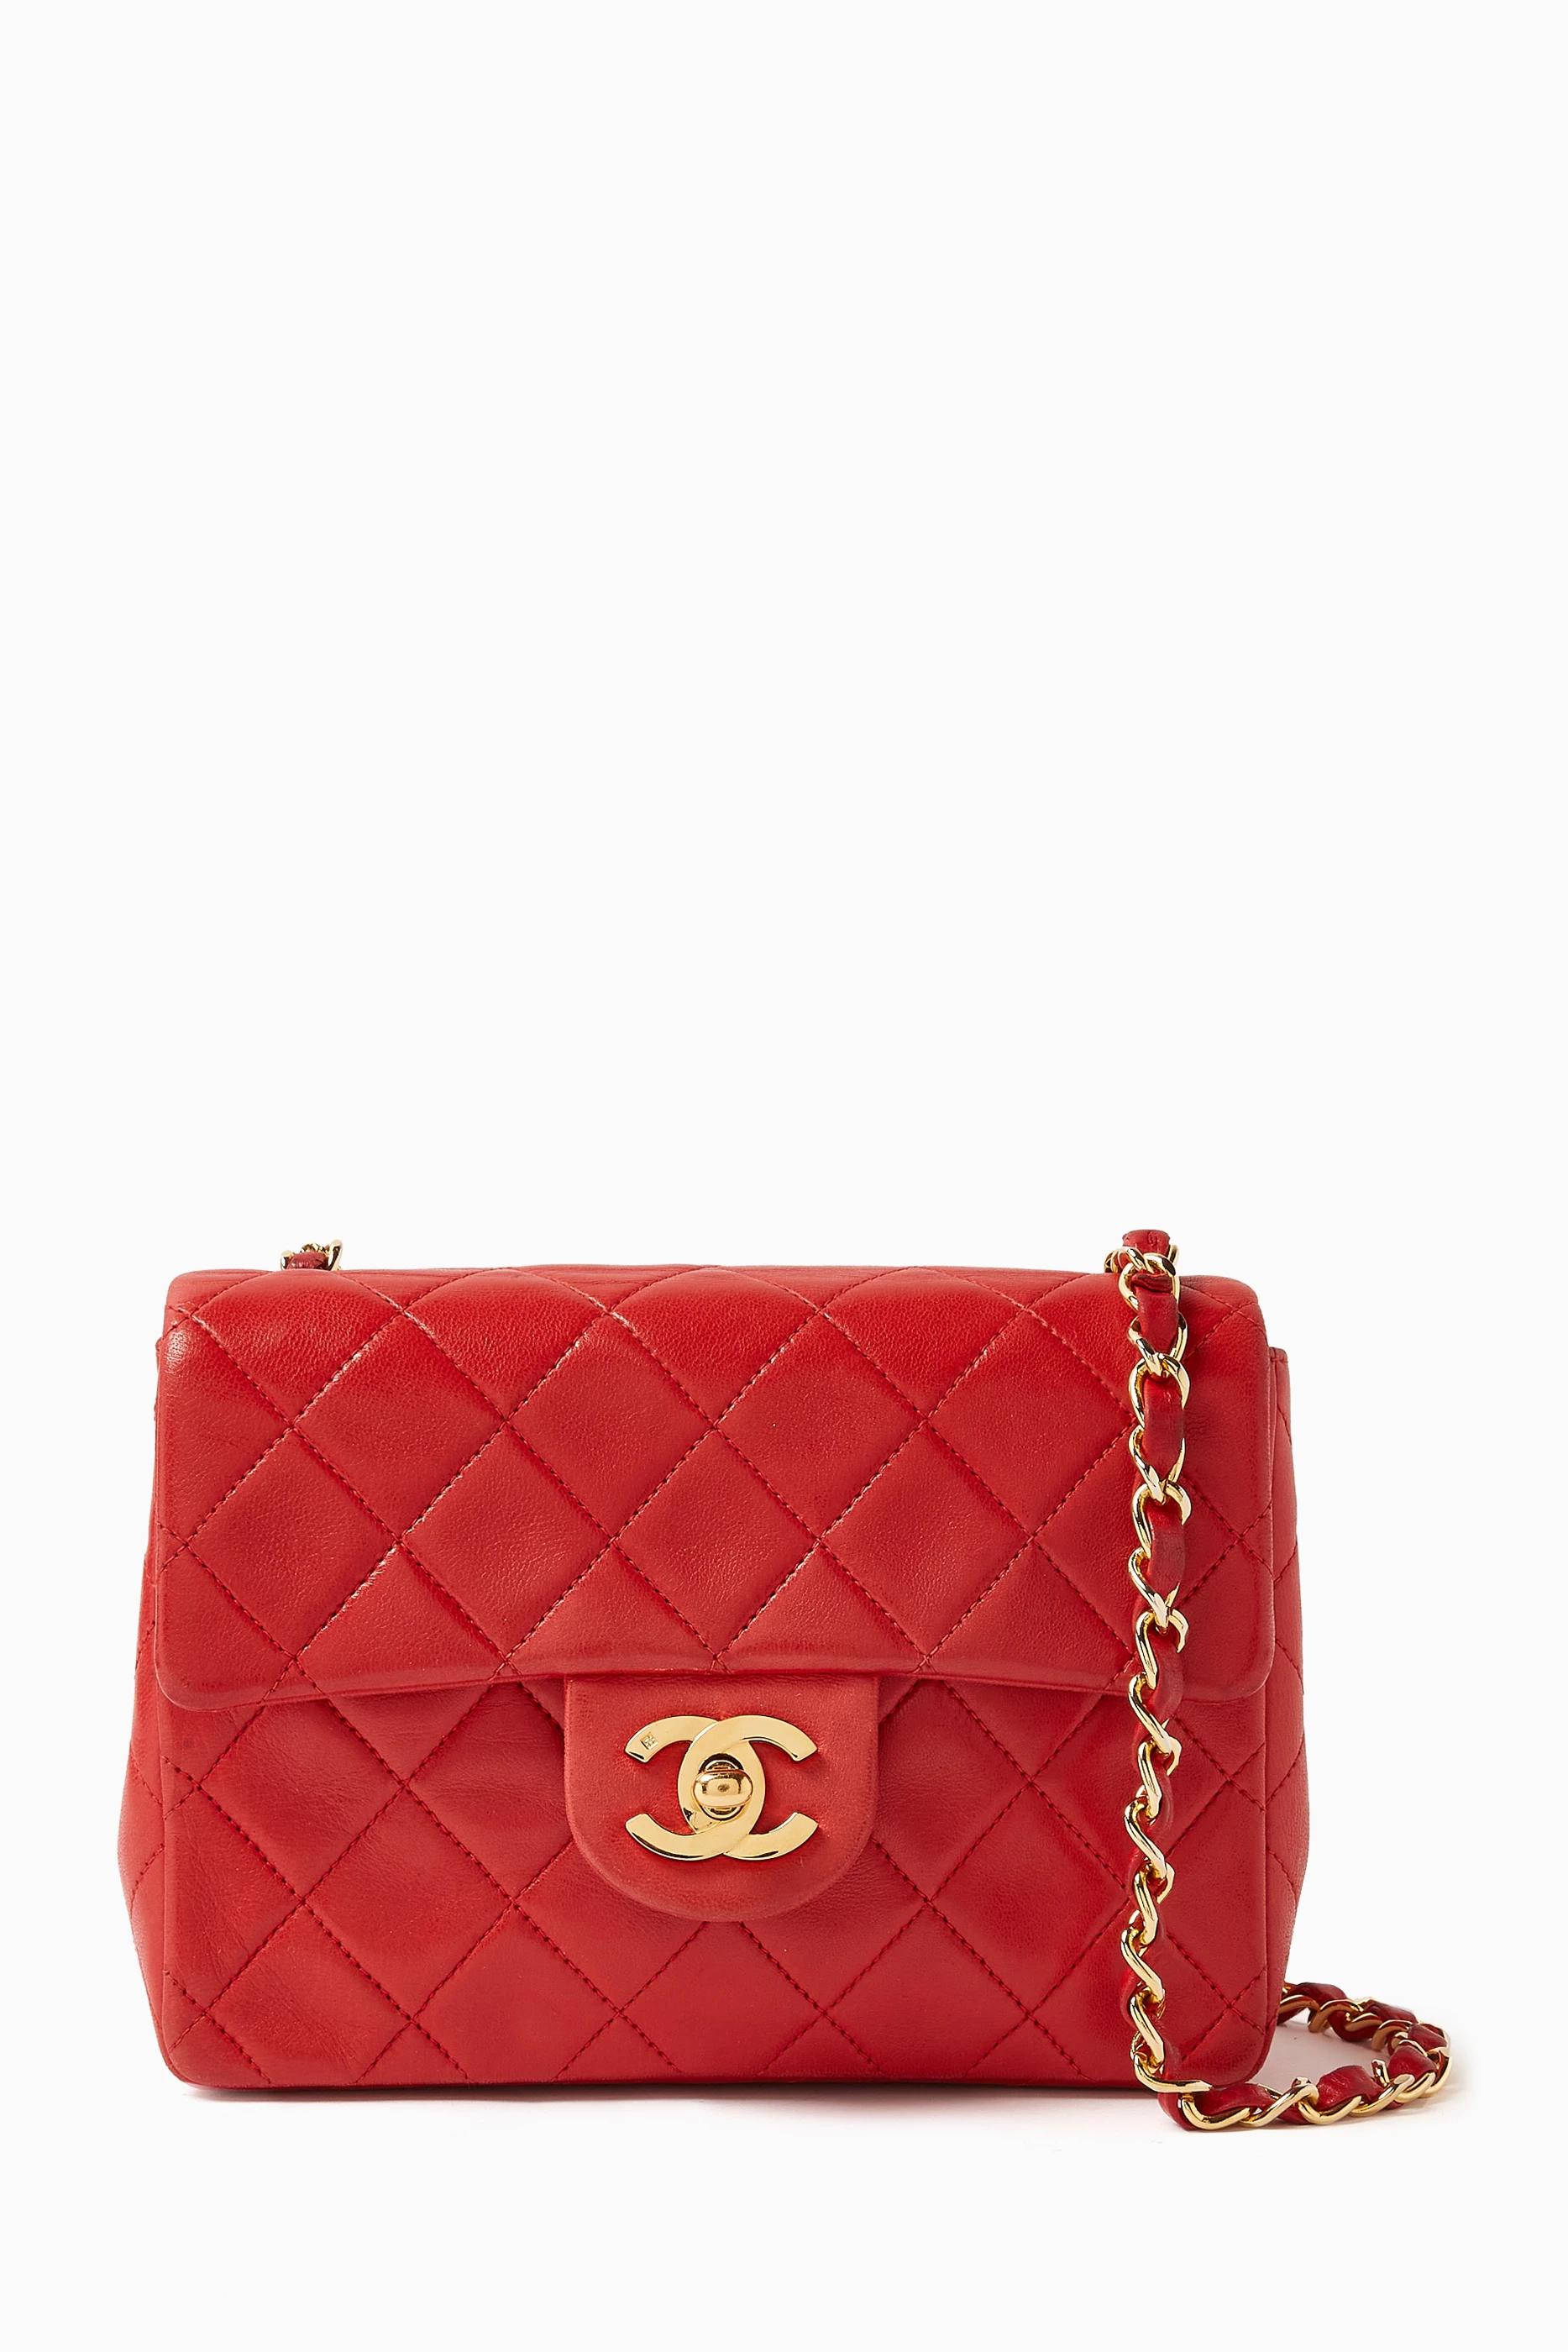 Used in Good Condition Chanel Flap Bag Calfskin Holo29 - usedband88